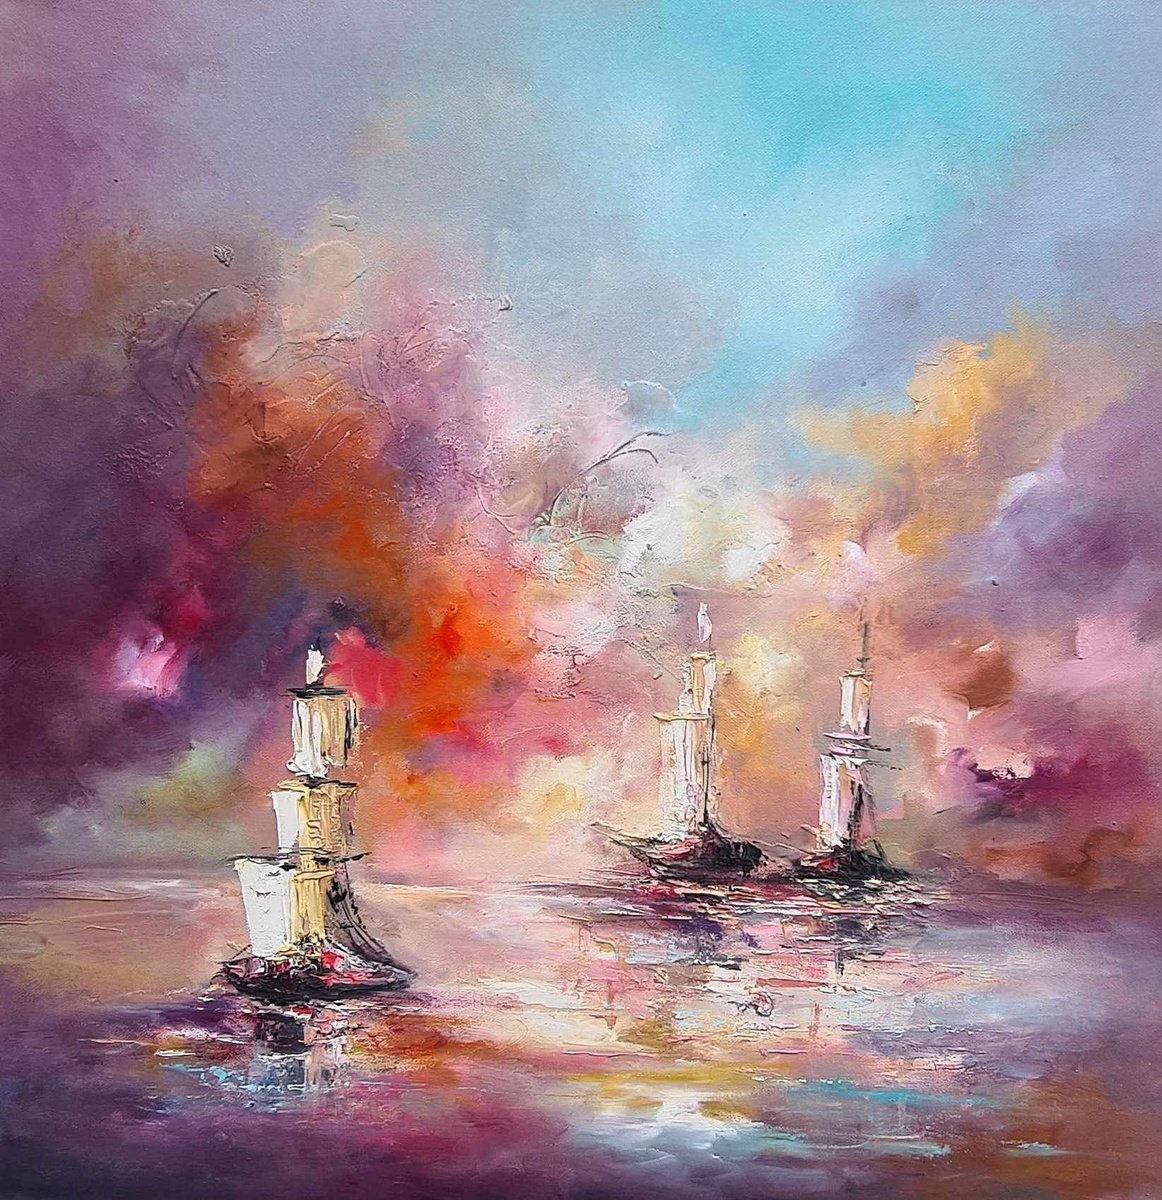 Sailing Together by Anna Schofield